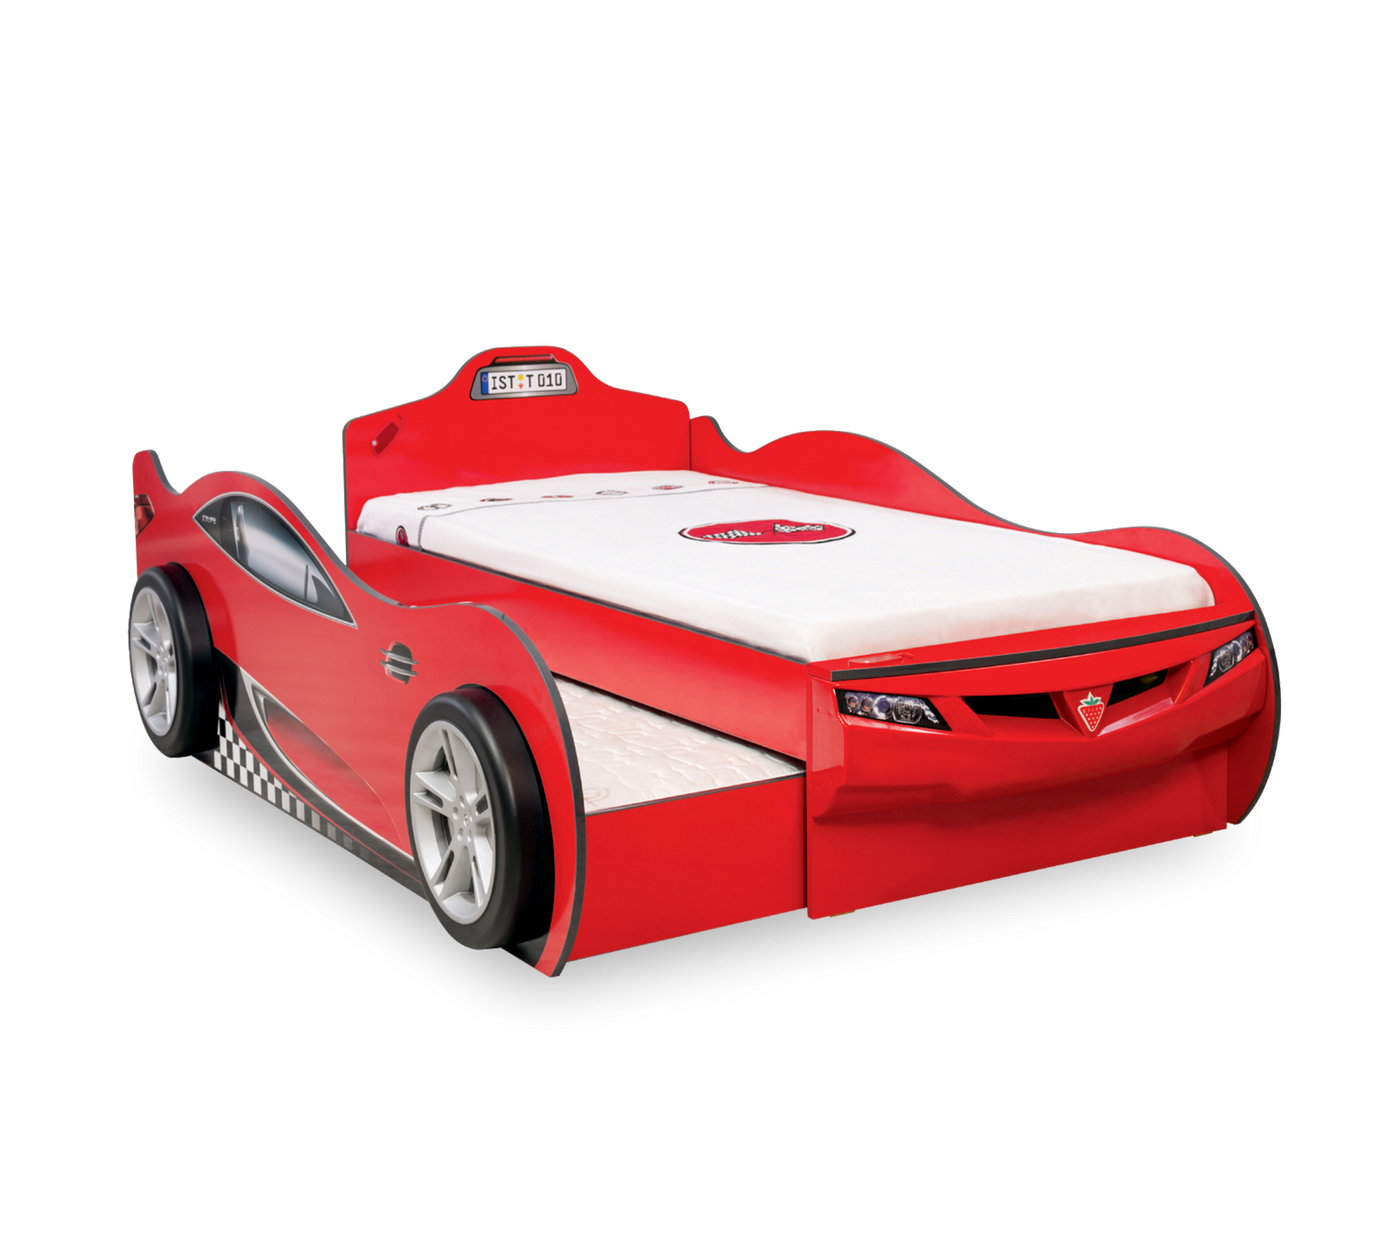 Coupe Carbed (With Friend Bed) (Red) (90x190 - 90x180 cm)